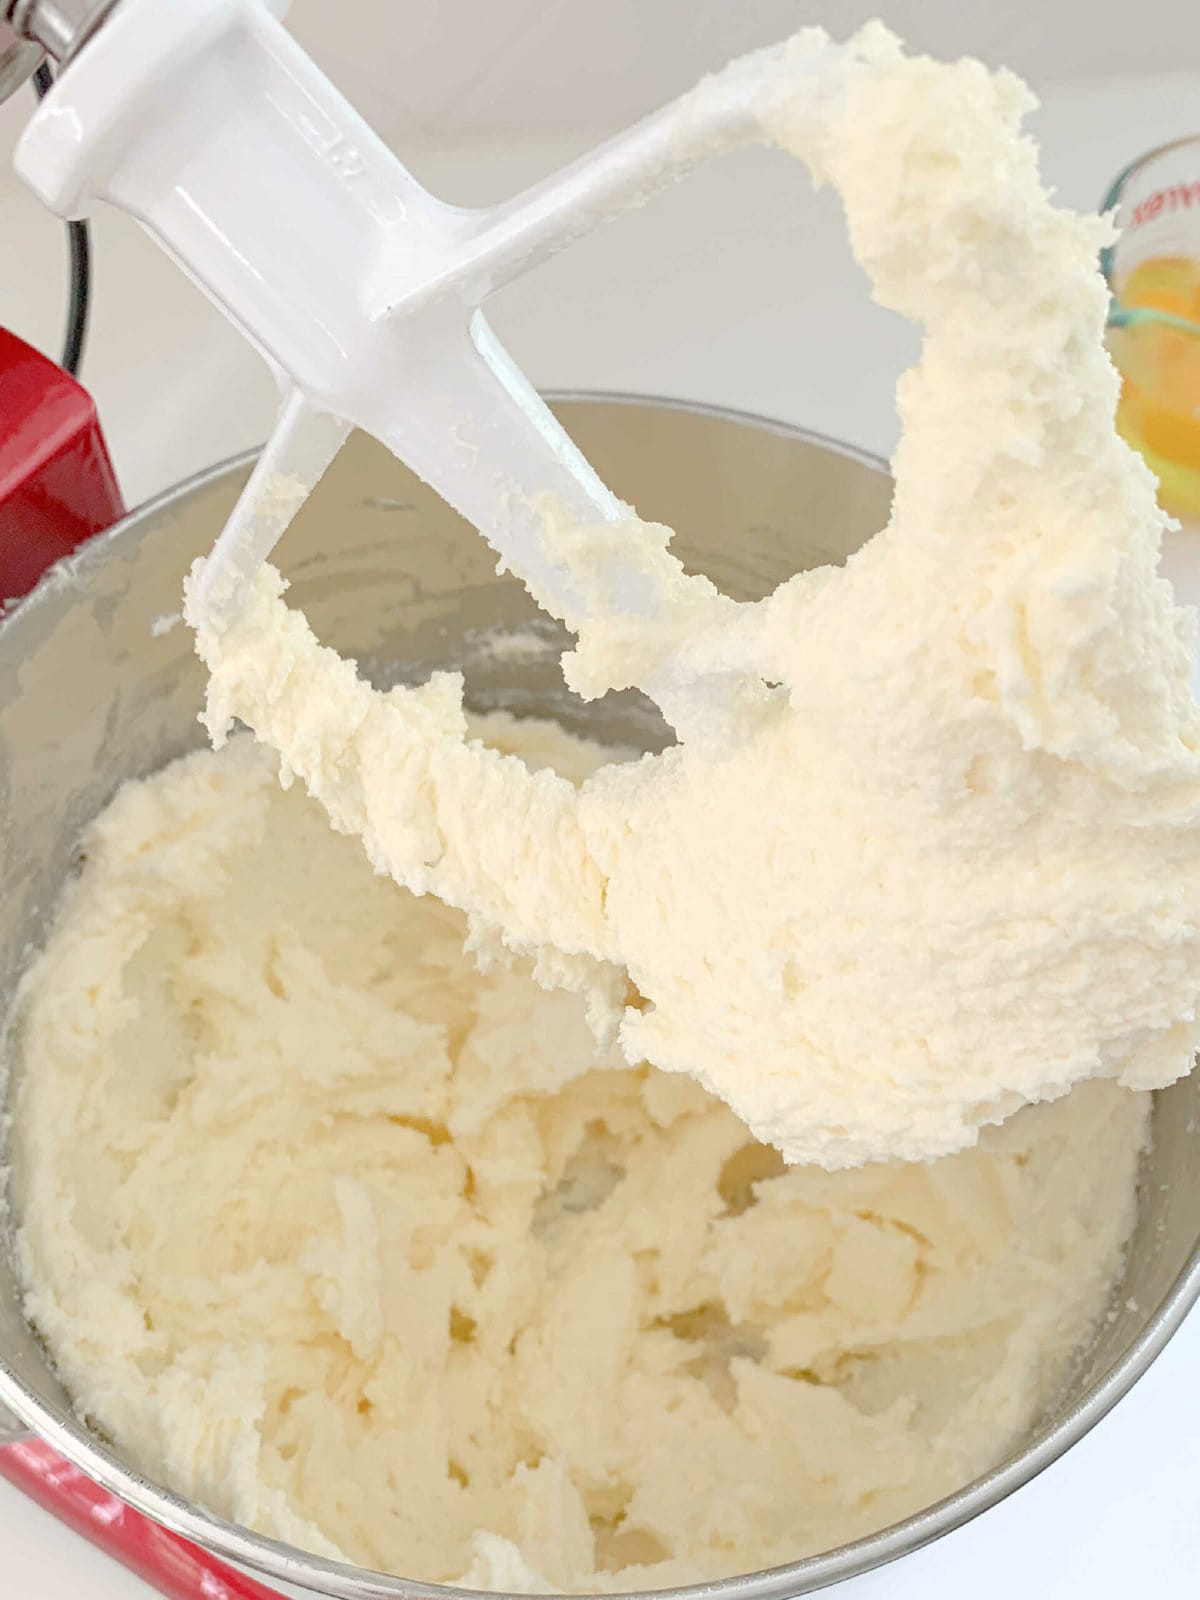 Creaming Butter and Sugar with paddle attachment of stand mixer